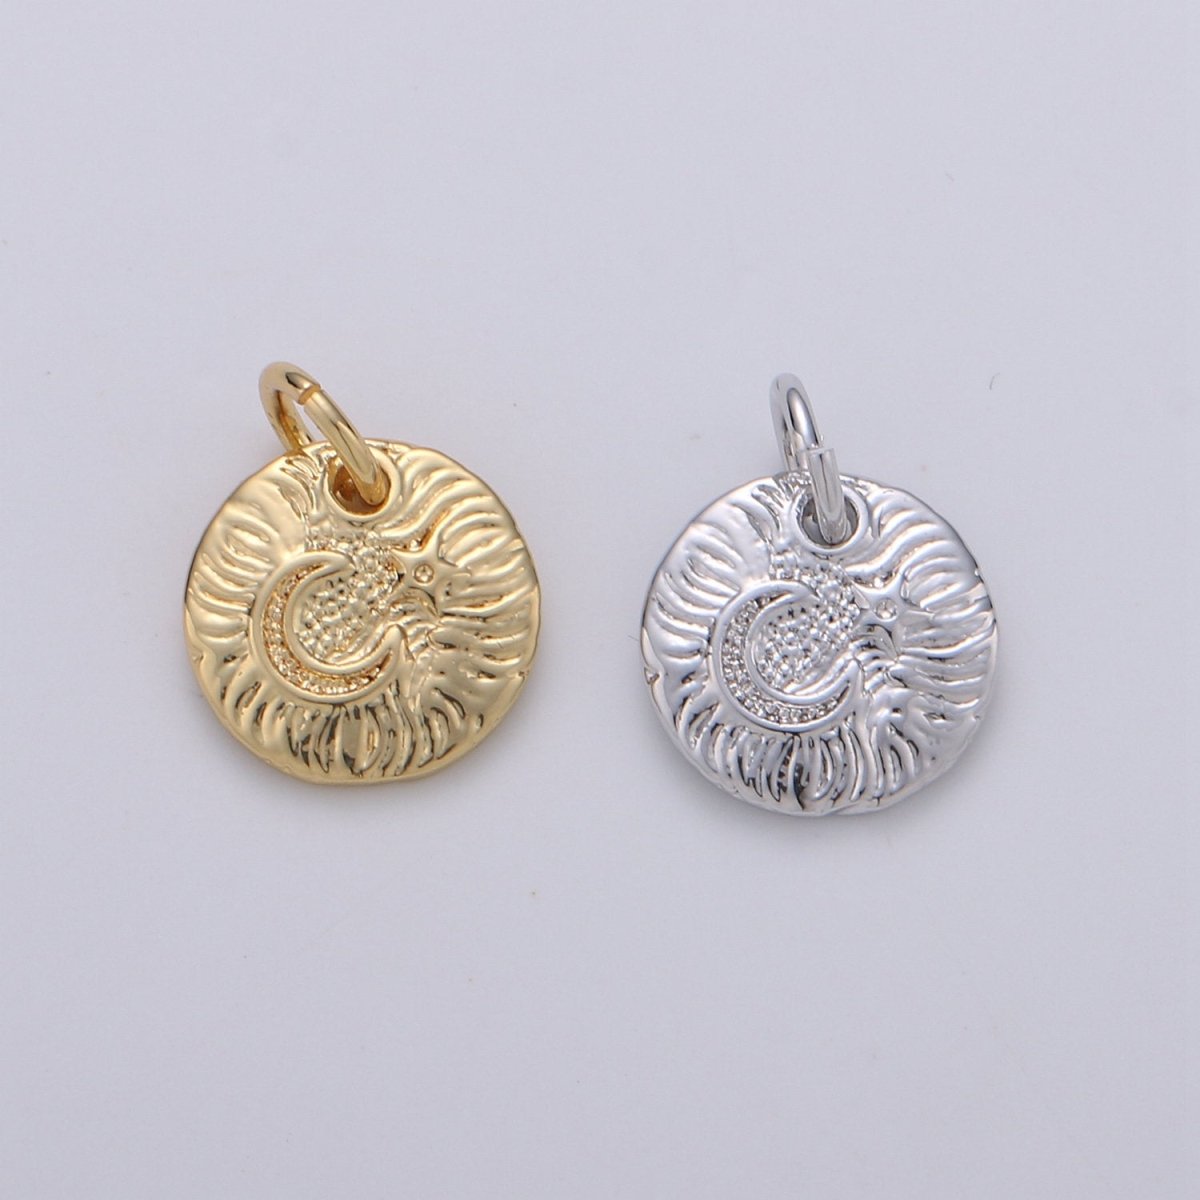 Celestial Jewelry Gold Crescent Moon Charm Rustic Coin Disc Charm Jewelry Making Supply 24K Gold Filled Findings D-372 D-373 - DLUXCA